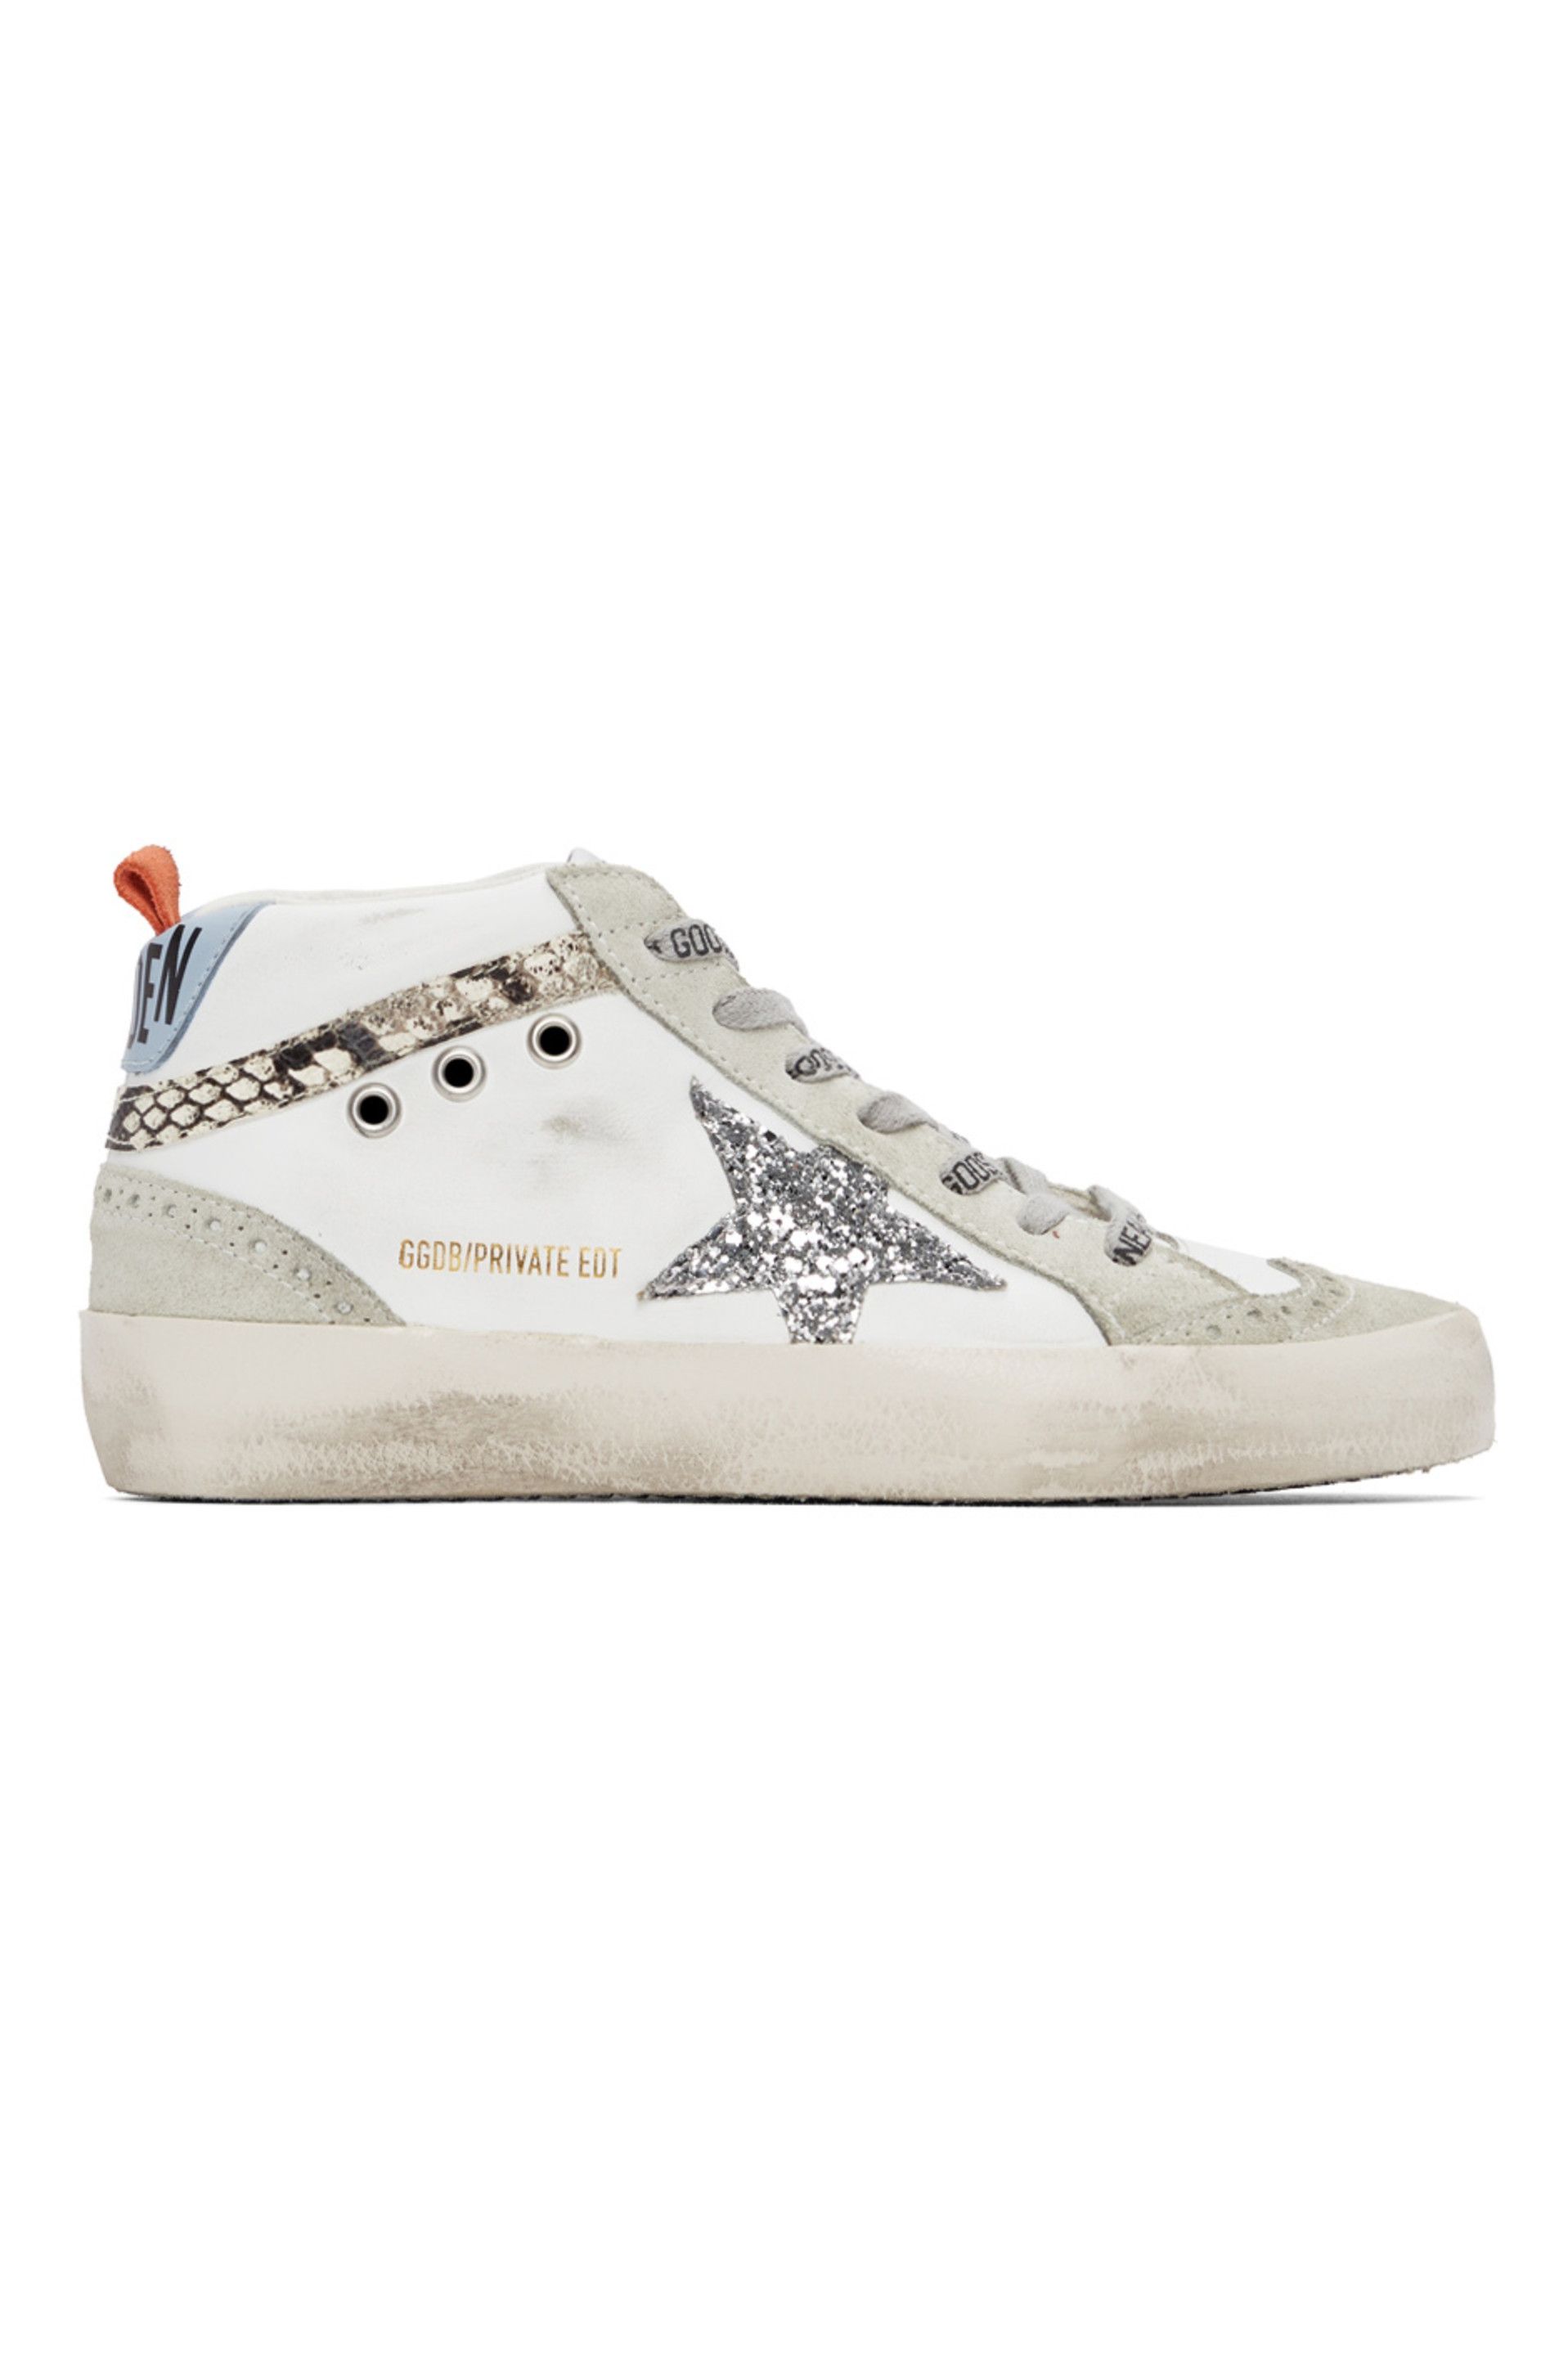 Golden Goose - SSENSE Exclusive White & Grey Mid Star Classic Sneakers | SSENSE